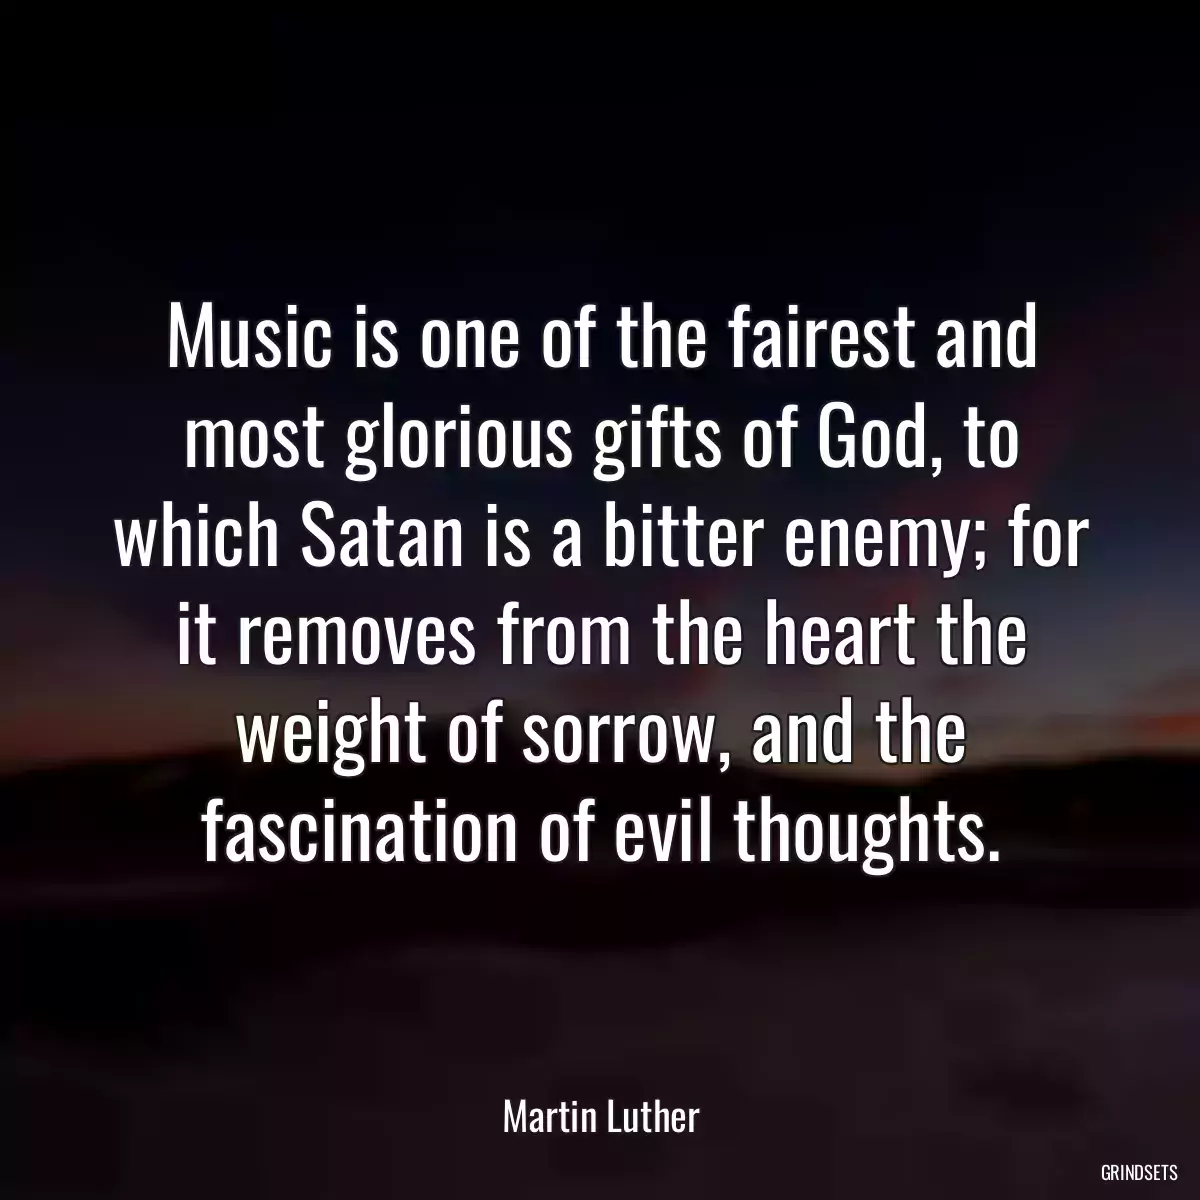 Music is one of the fairest and most glorious gifts of God, to which Satan is a bitter enemy; for it removes from the heart the weight of sorrow, and the fascination of evil thoughts.